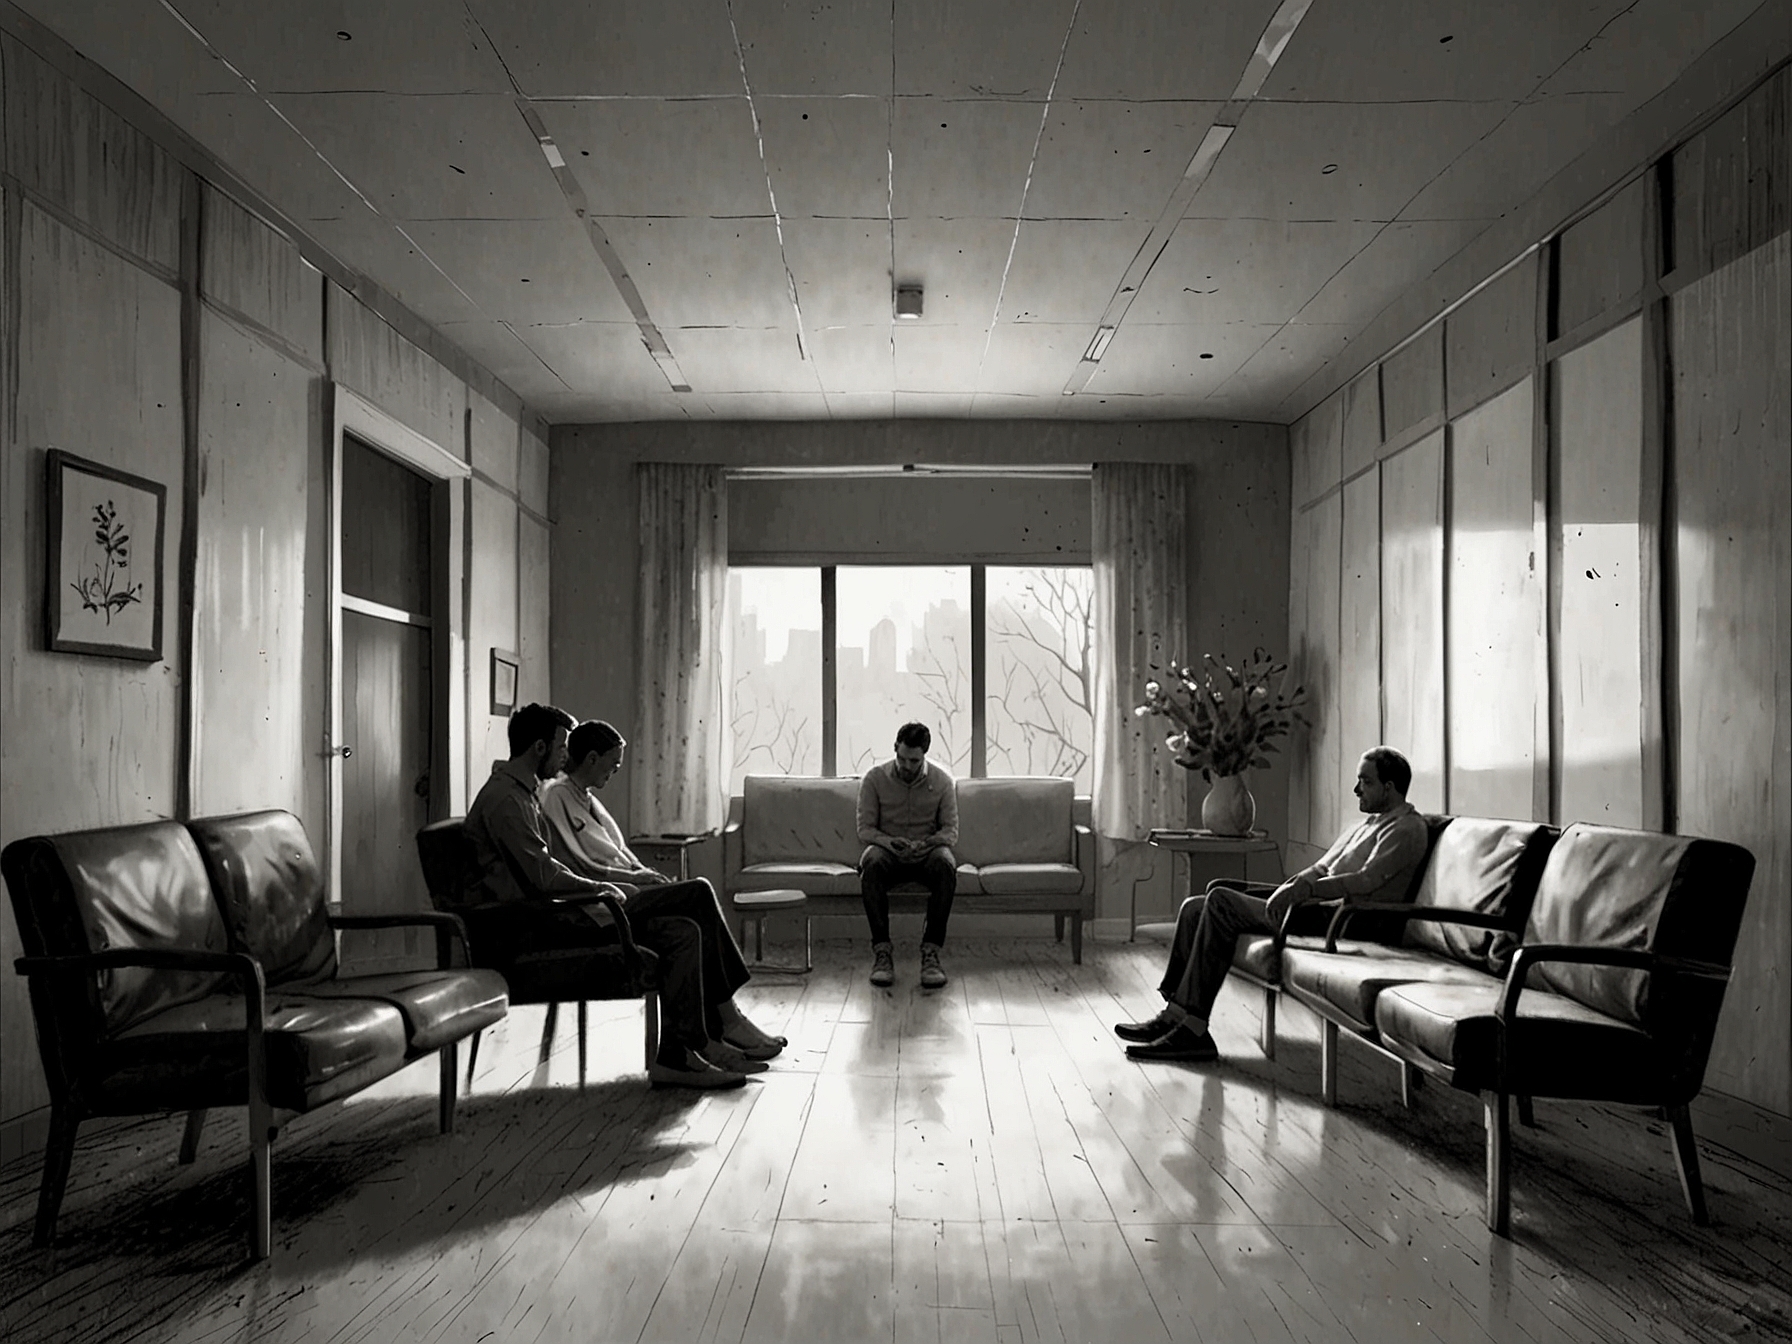 An emotional illustration of a grieving couple sitting in a medical waiting room surrounded by expectant parents, symbolizing the contrasting feelings of loss and joy.